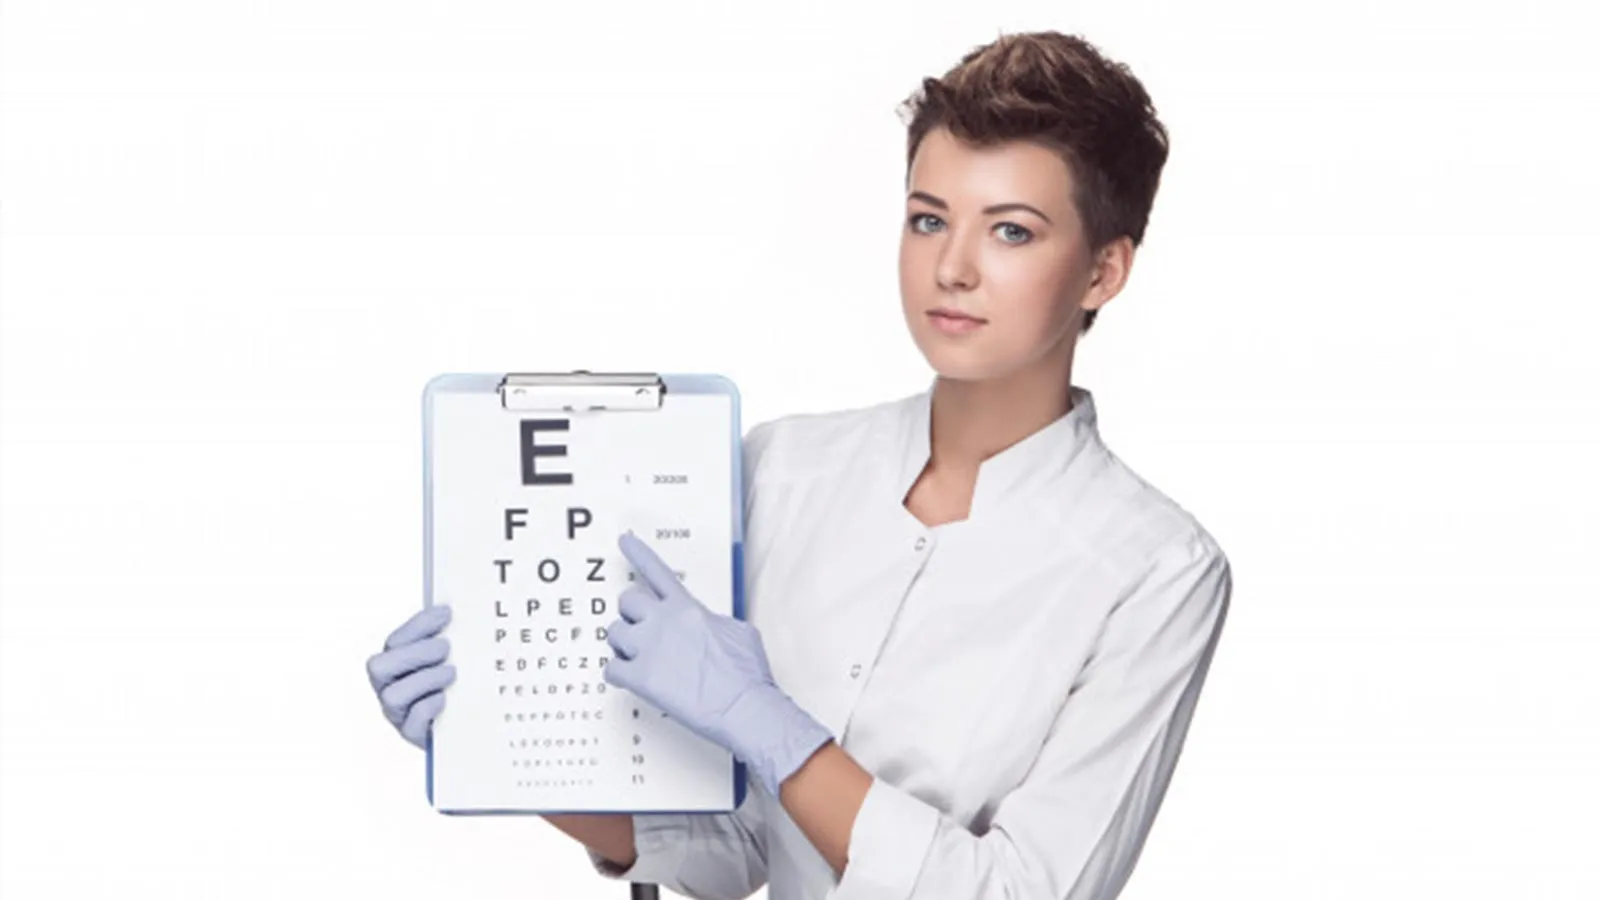 Optometrist - When to consult and educational background